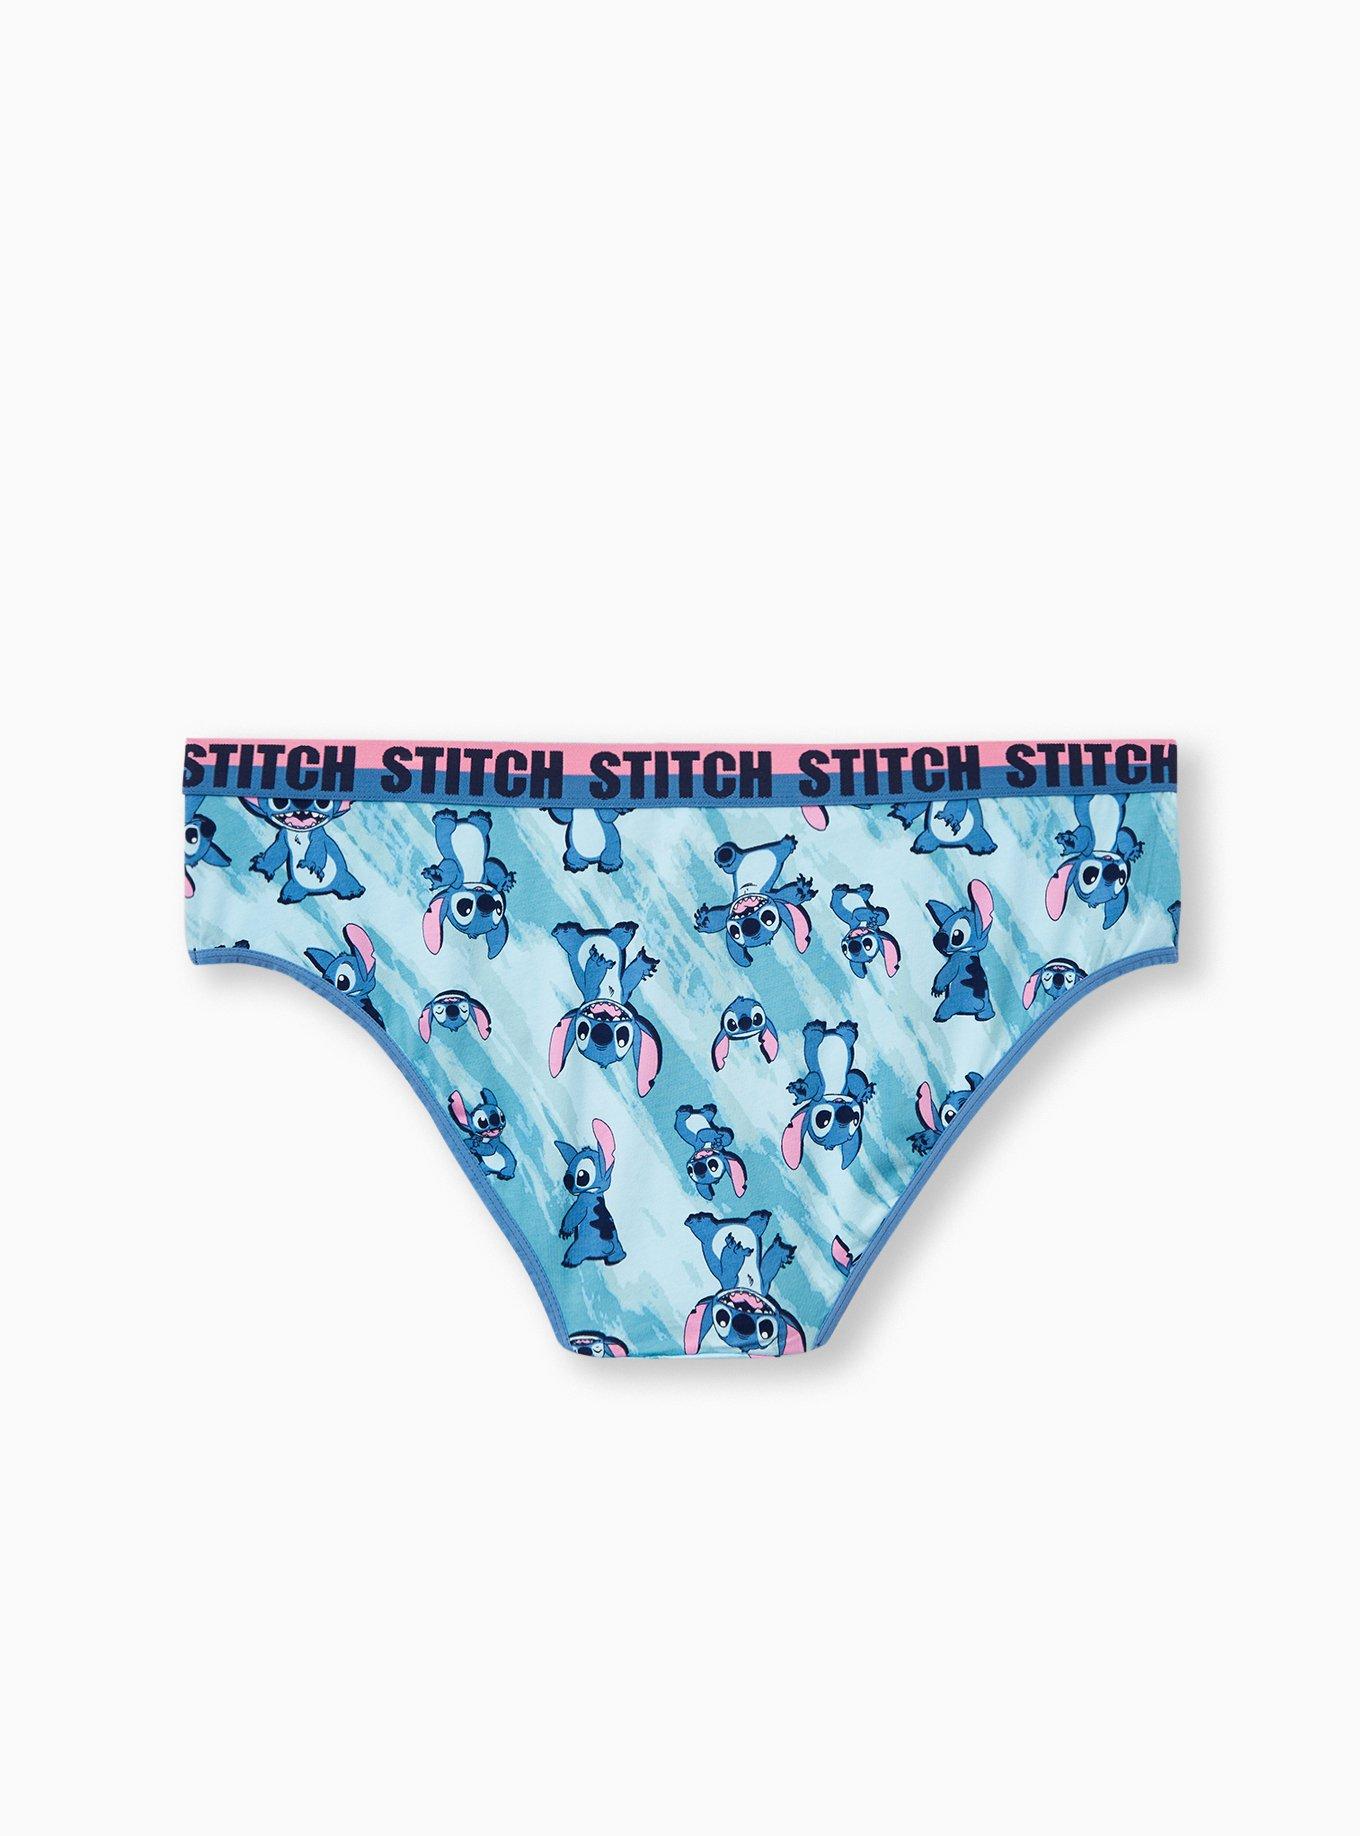 Buy Disney Stitch Lilo and Stitch All Over Panties Online at